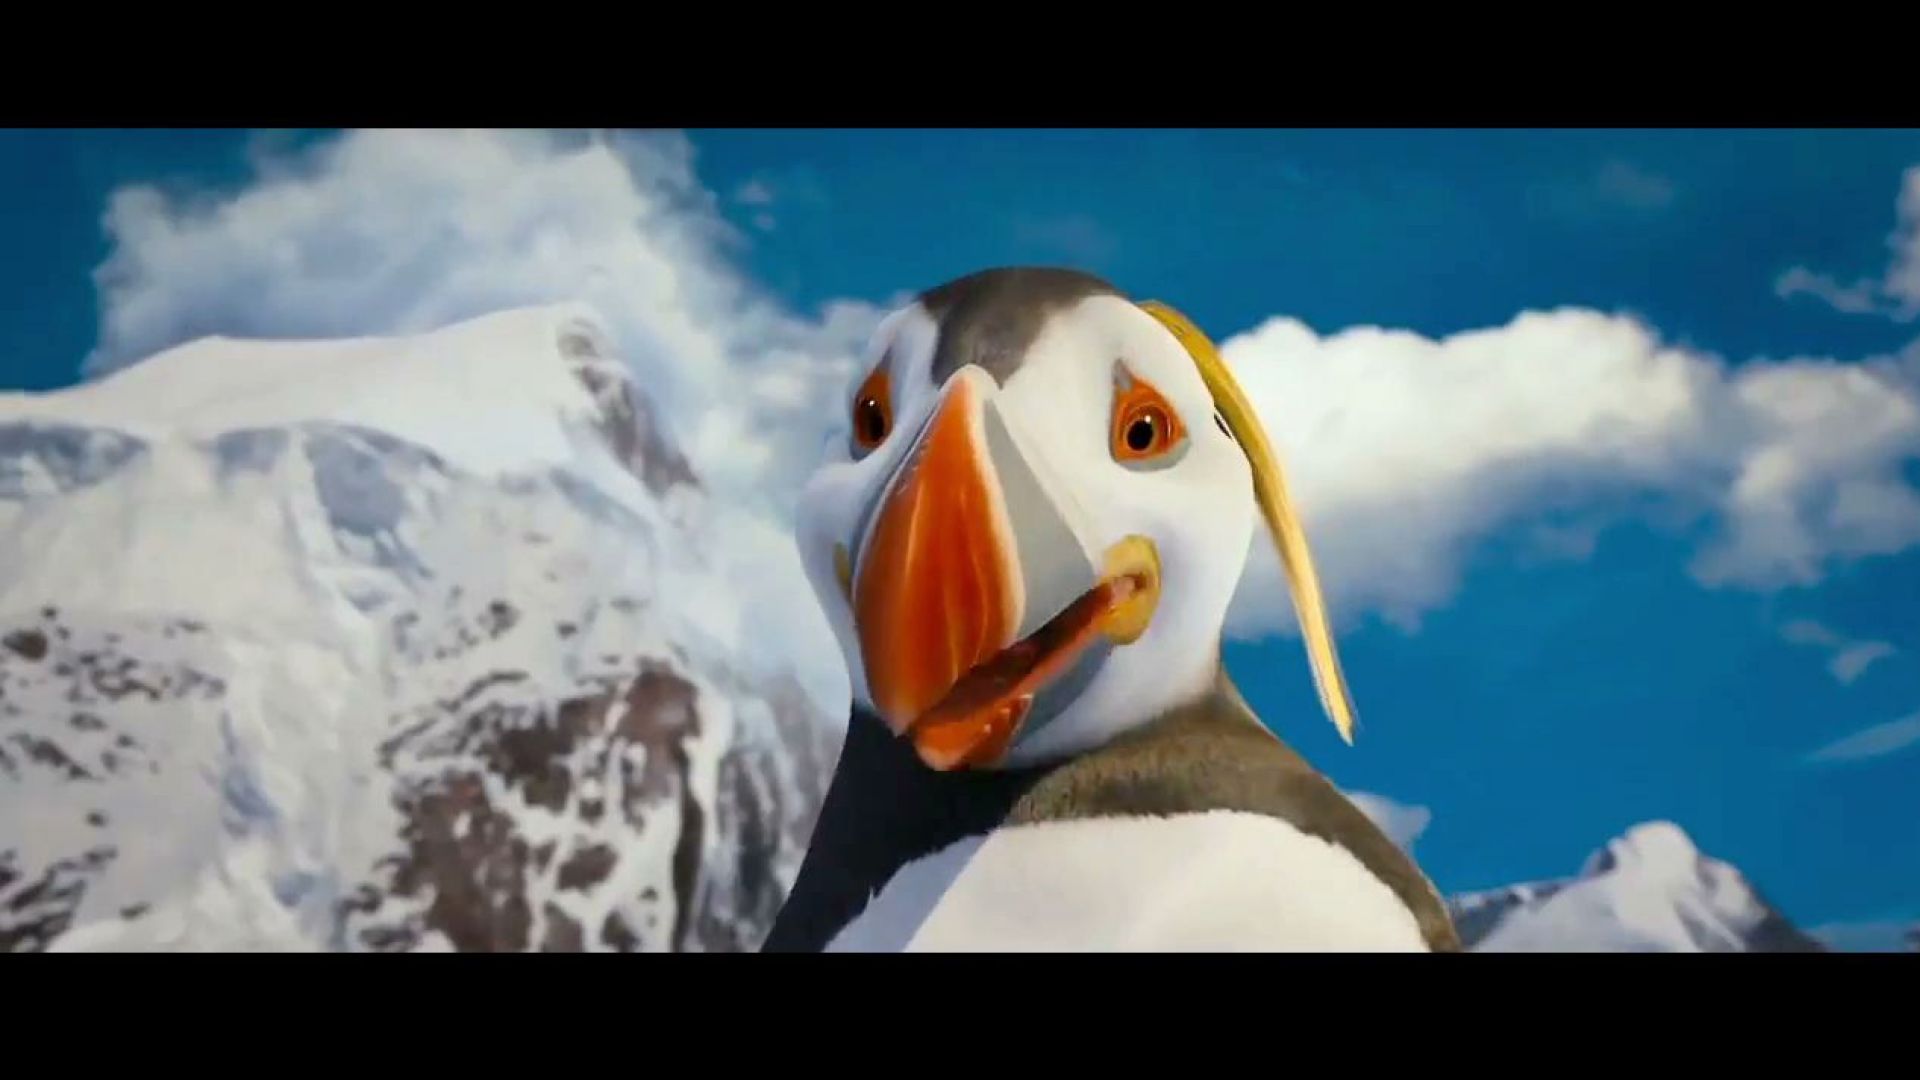 Sven think, all rights reserved. Copyright me. Happy Feet 2